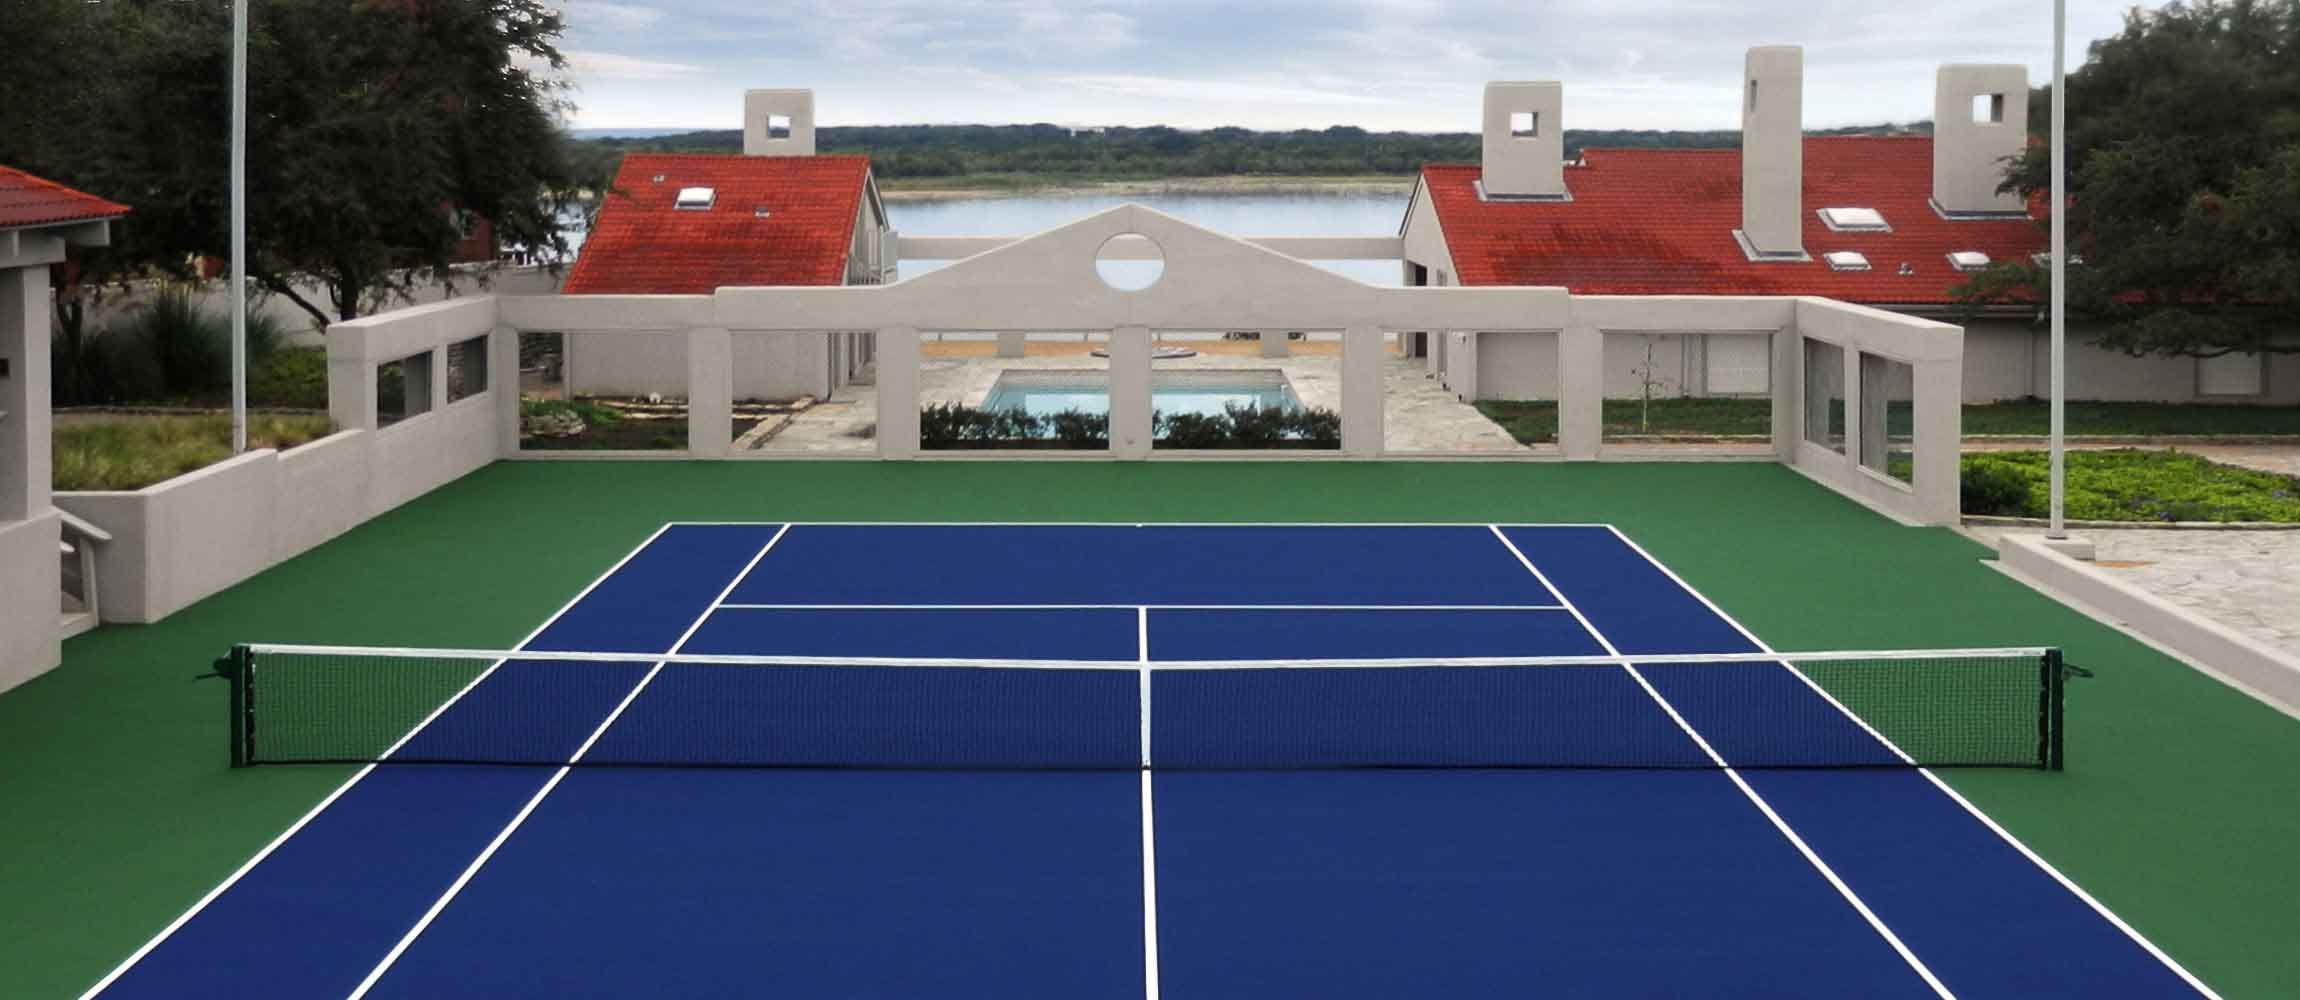 Master Systems Courts Tennis Court Slide 1